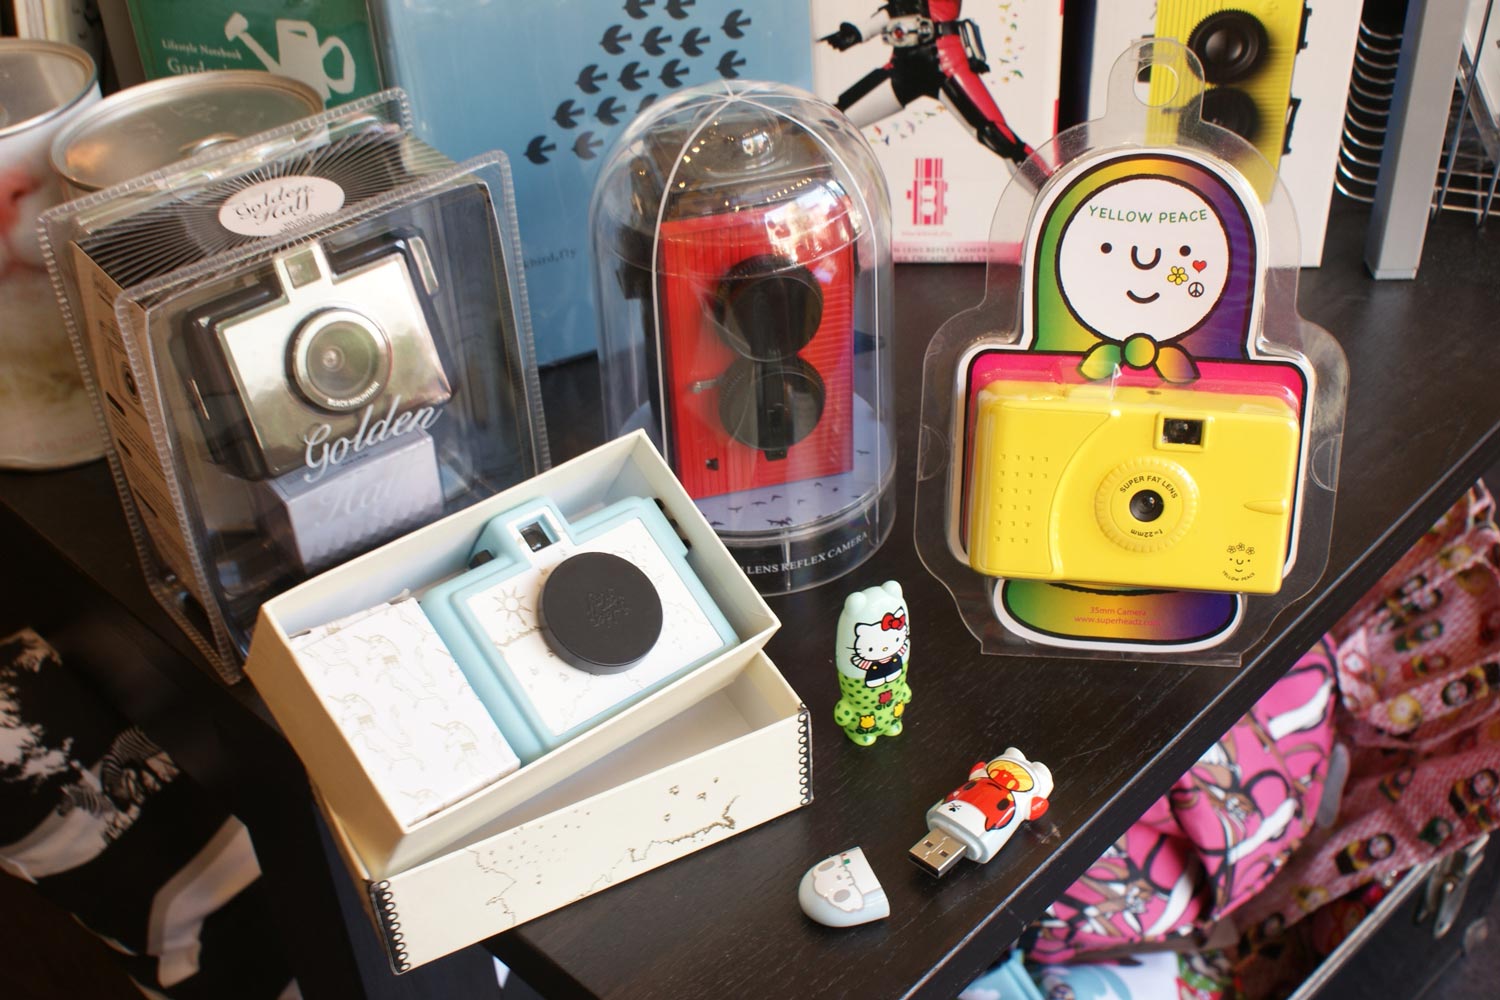 Who else remembers the Japanese toy camera craze that likely sparked Instagram itself?